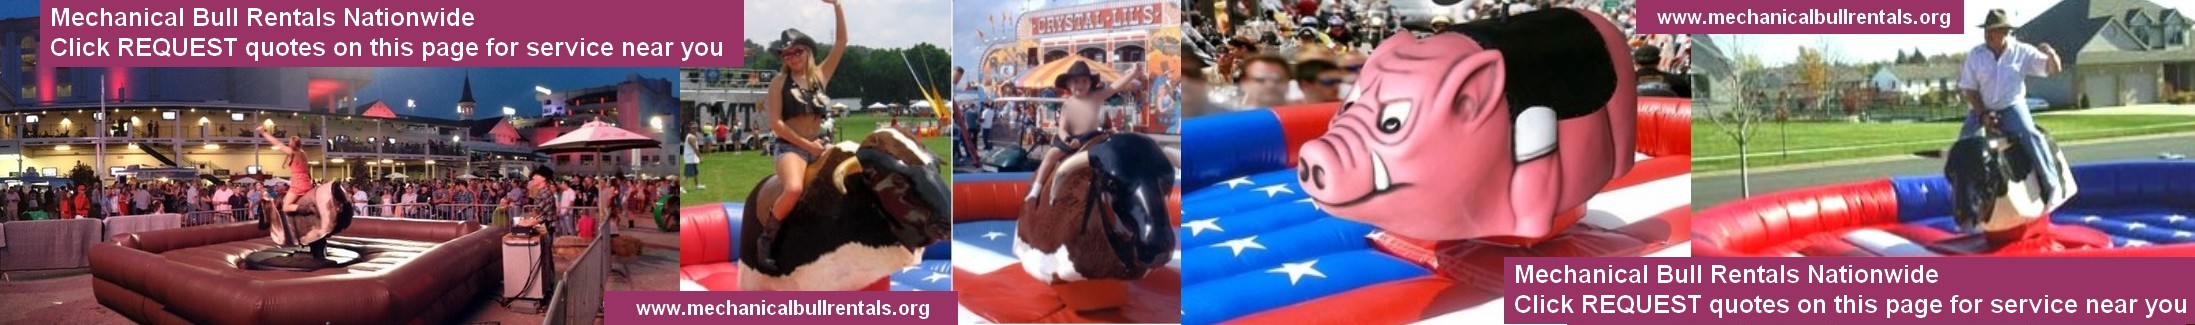 Mechanical Bull Rentals Victoria Texas TX and near you. Free referrals to local mechanical bull companies LOGO